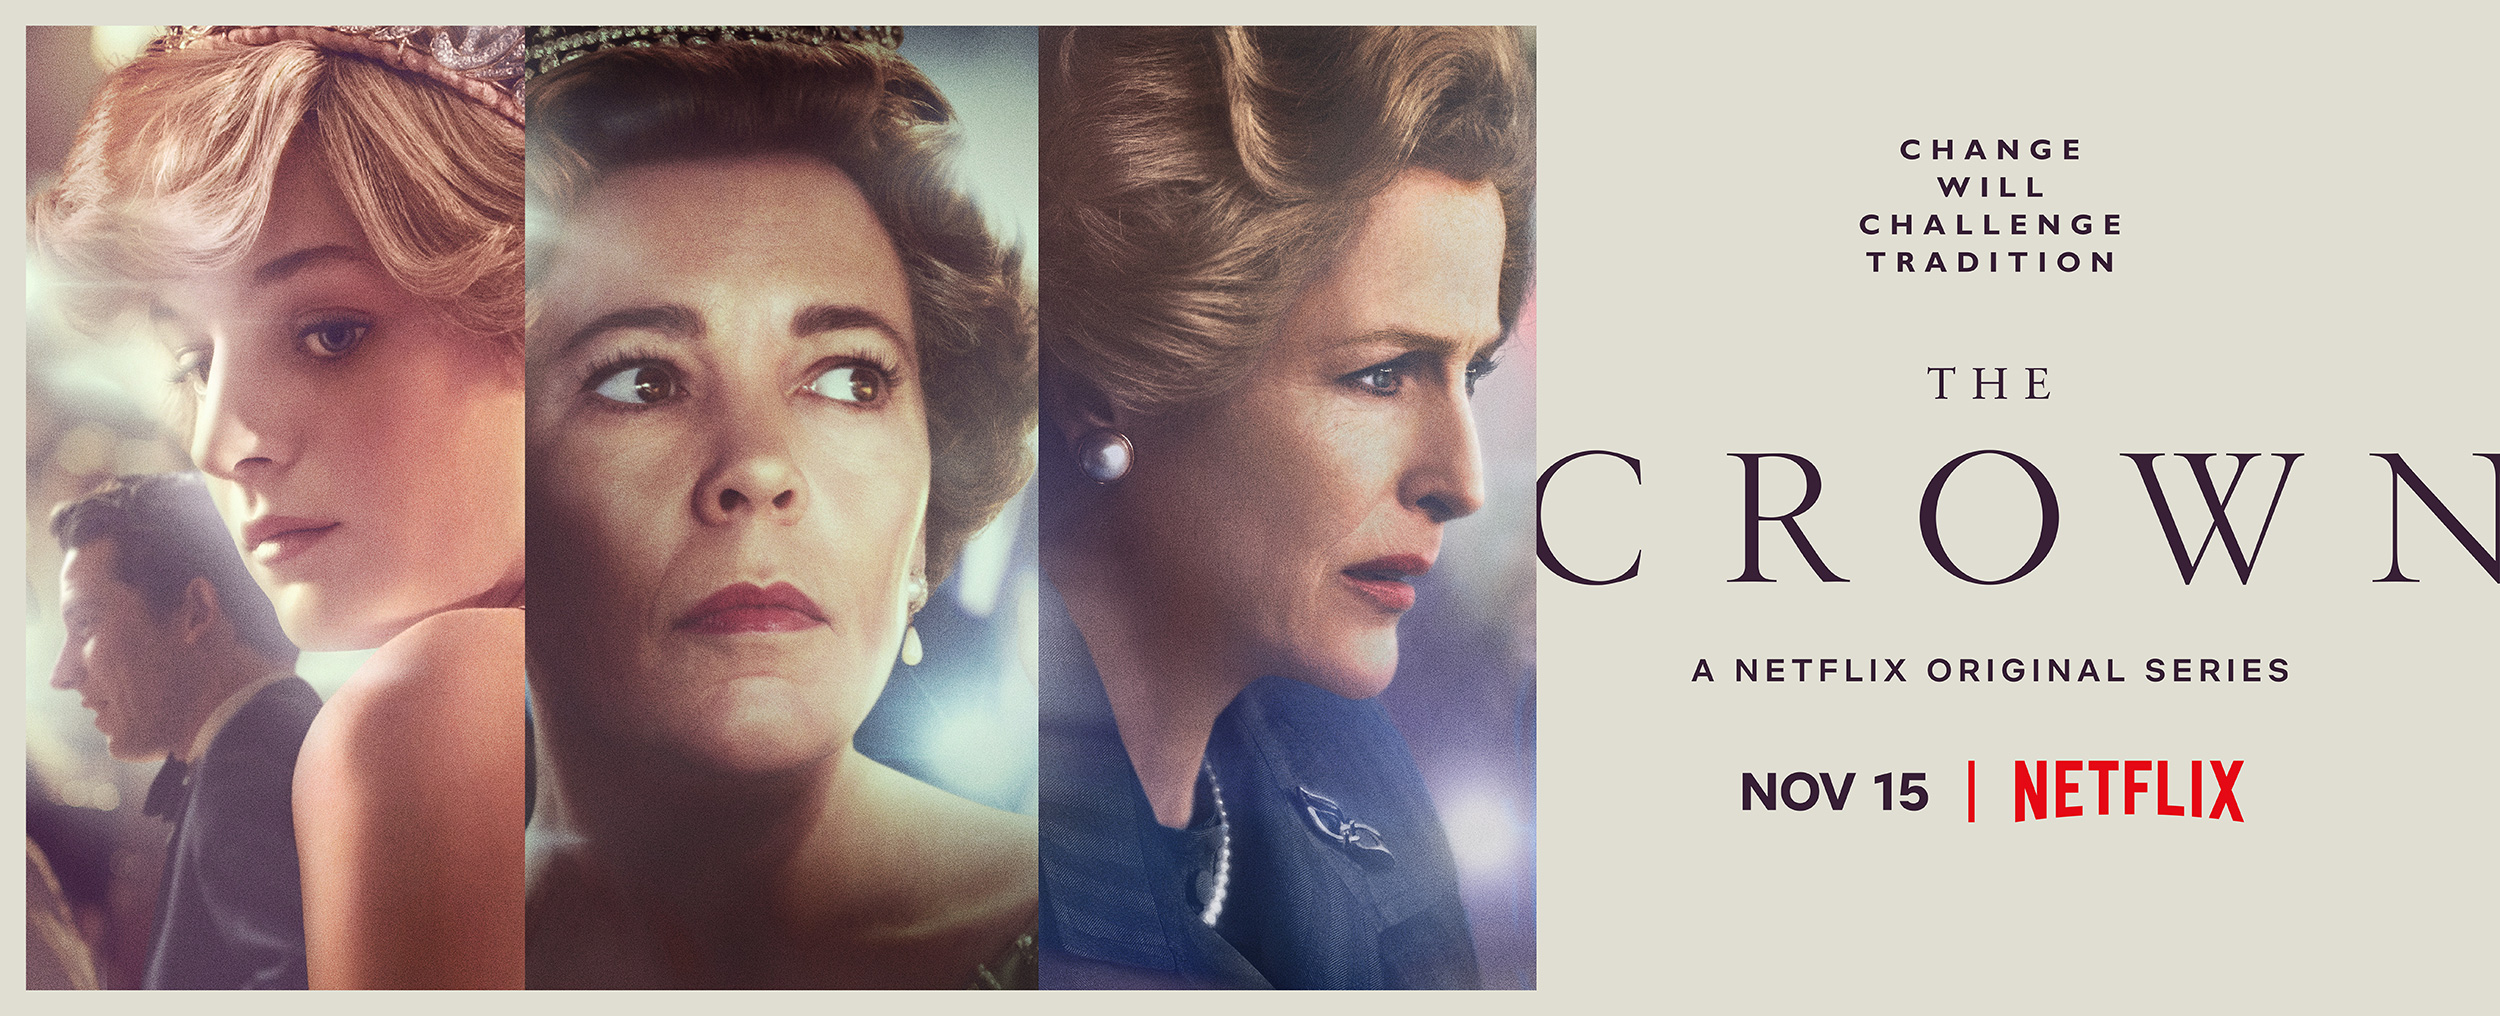 Netflix releases promotional material for 'The Crown'